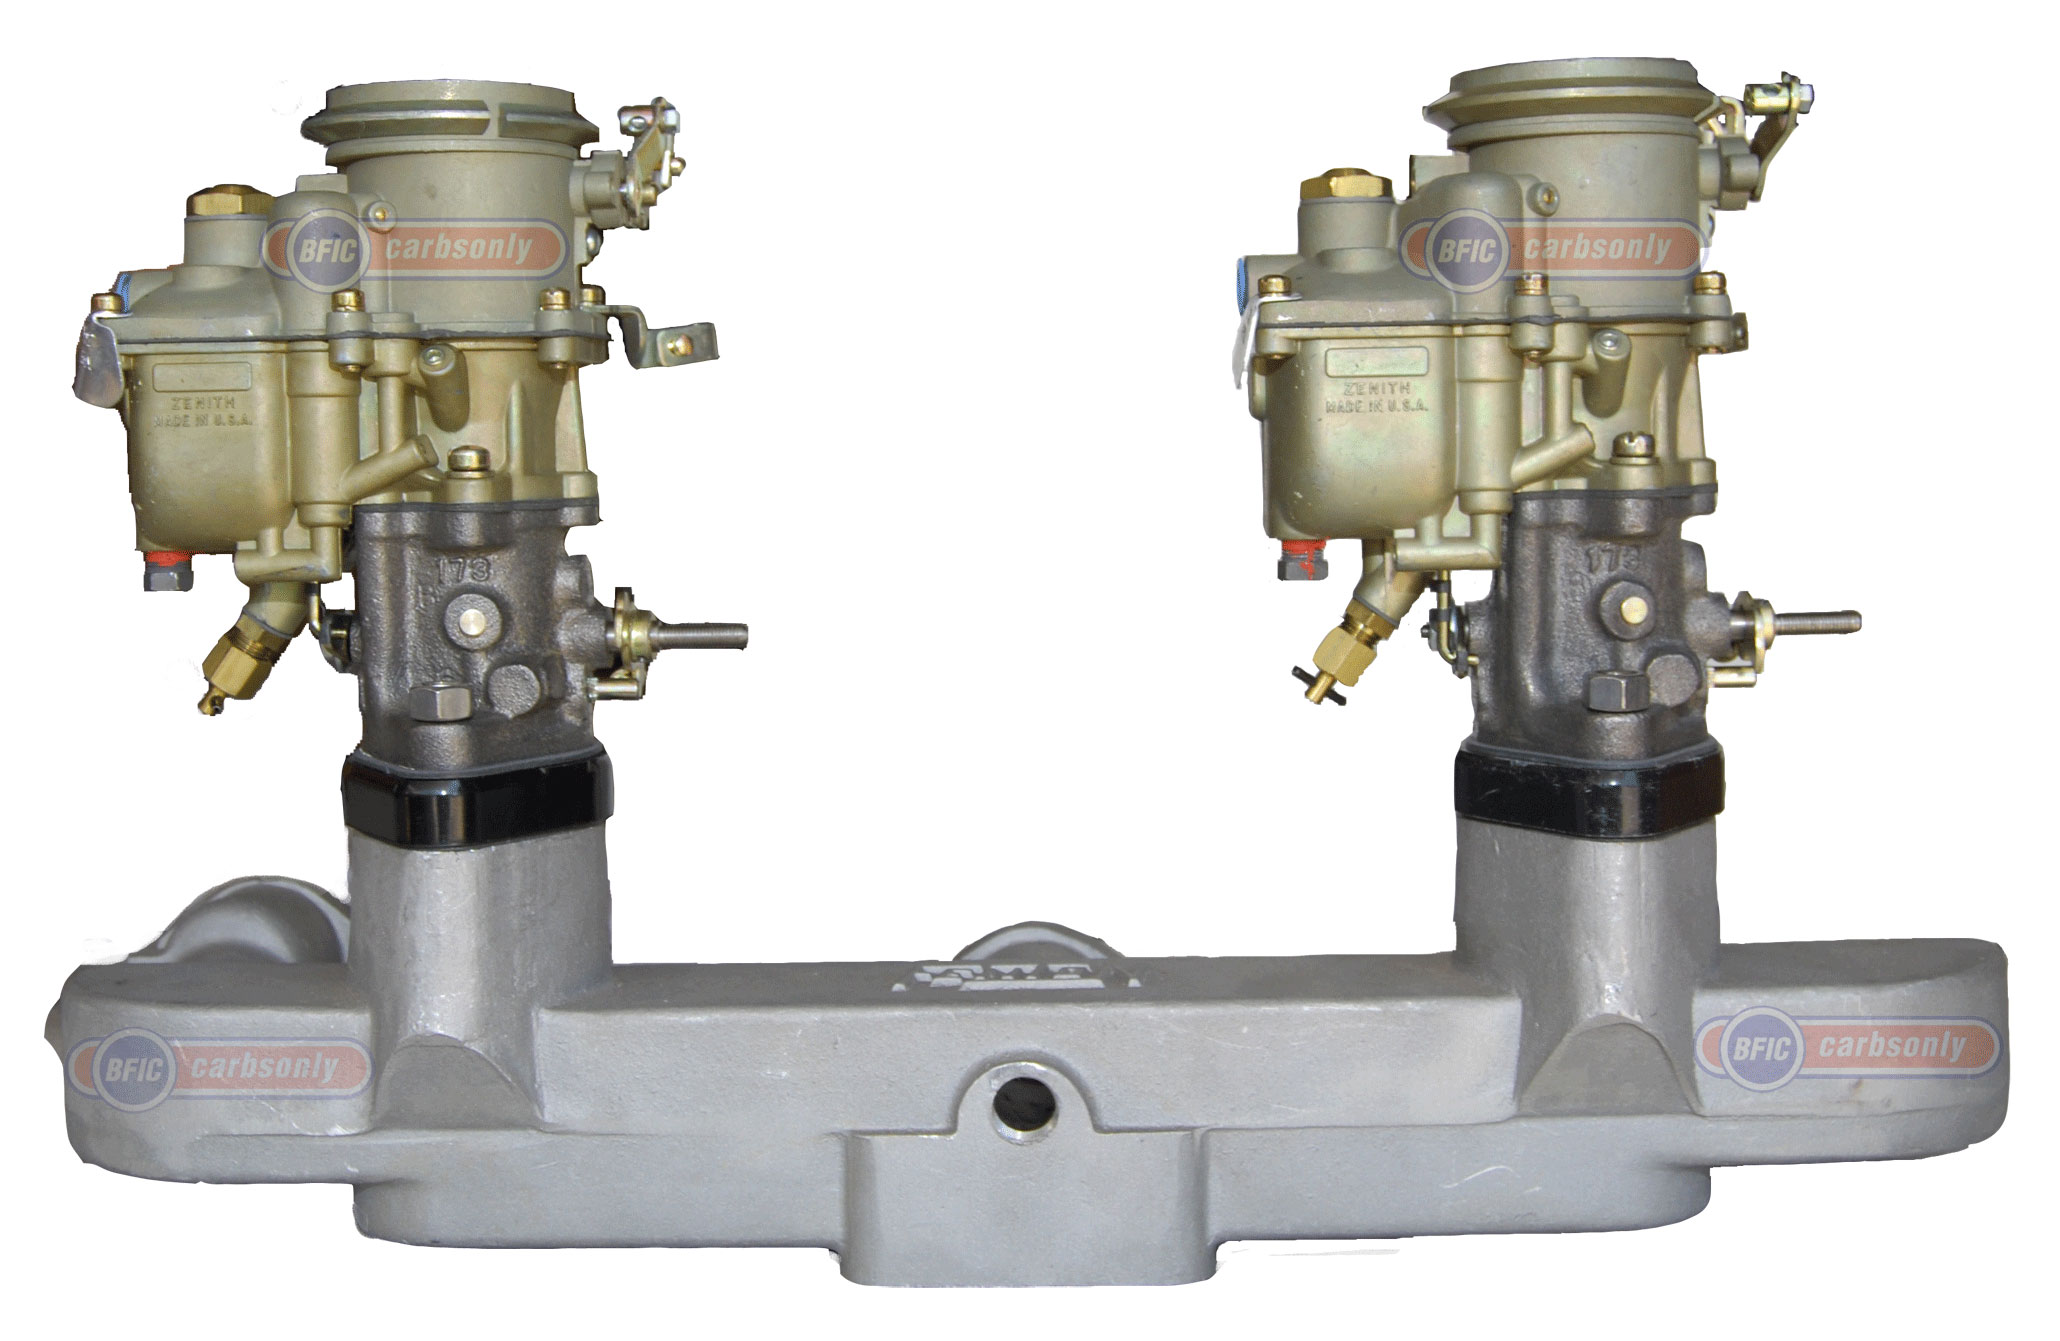 Dual New Zenith carbureors With Fenton Manifold